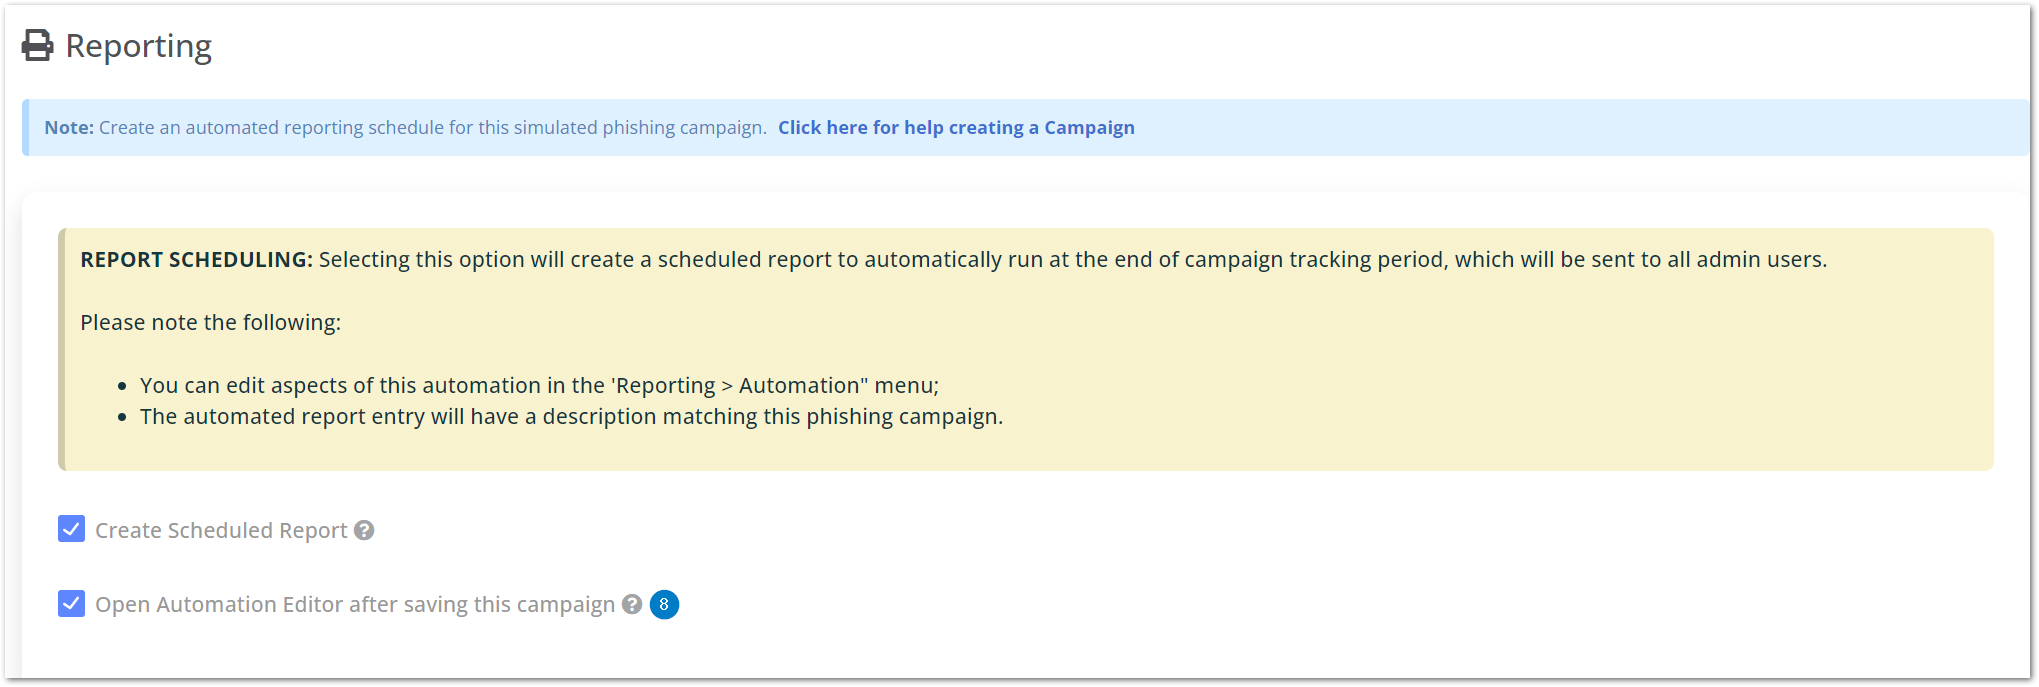 Phishing_Campaign_Automation_-_Campaign_-_Open_Automation_Editor_After_Saving_This_Campaign.png